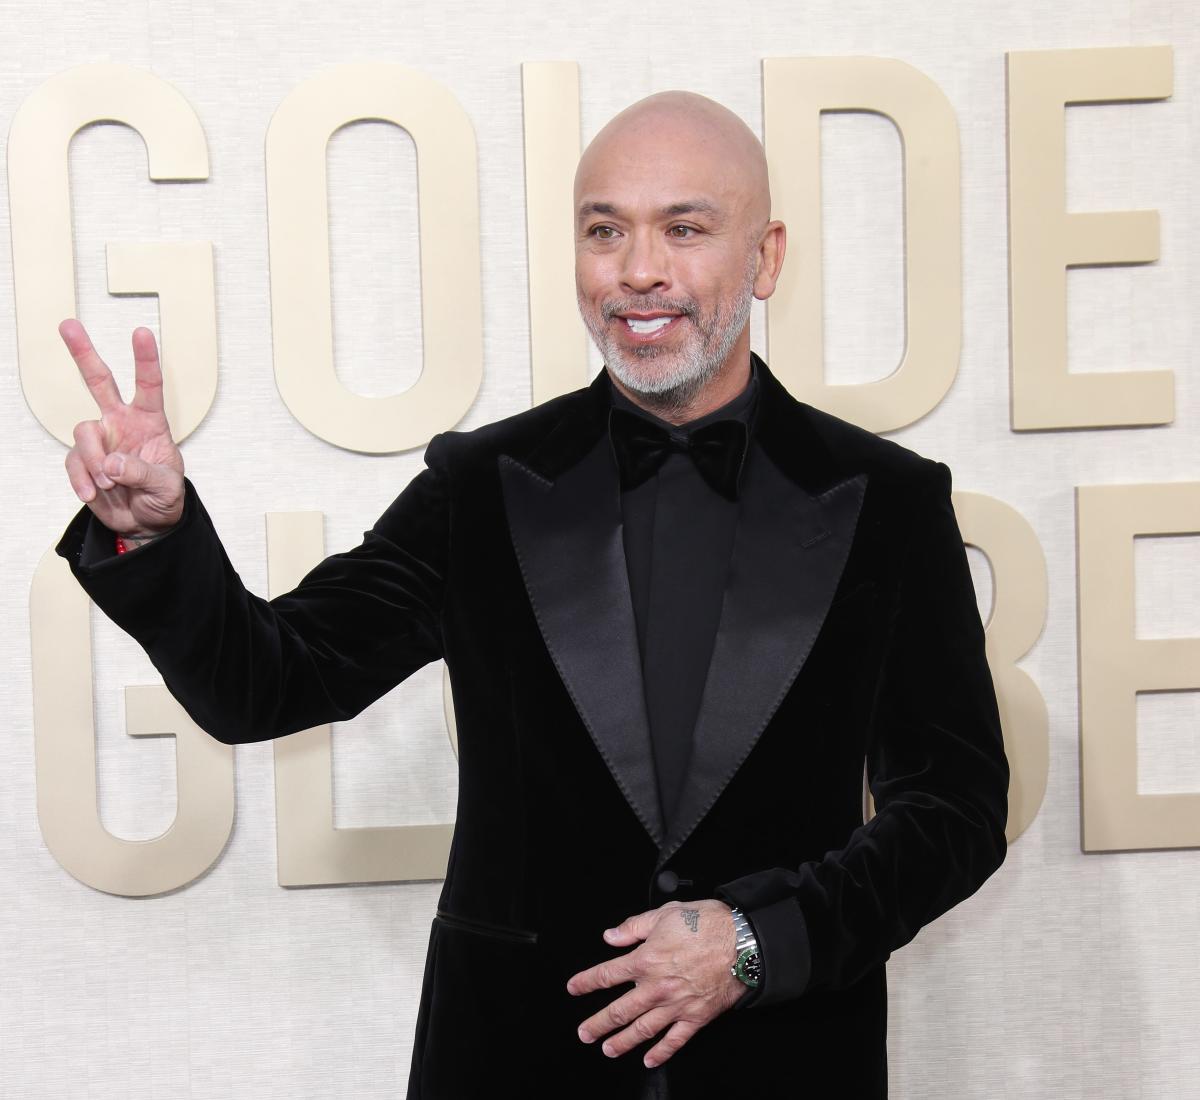 Jo Koy's Golden Globes opening monologue met with blank stares: 'I got ...